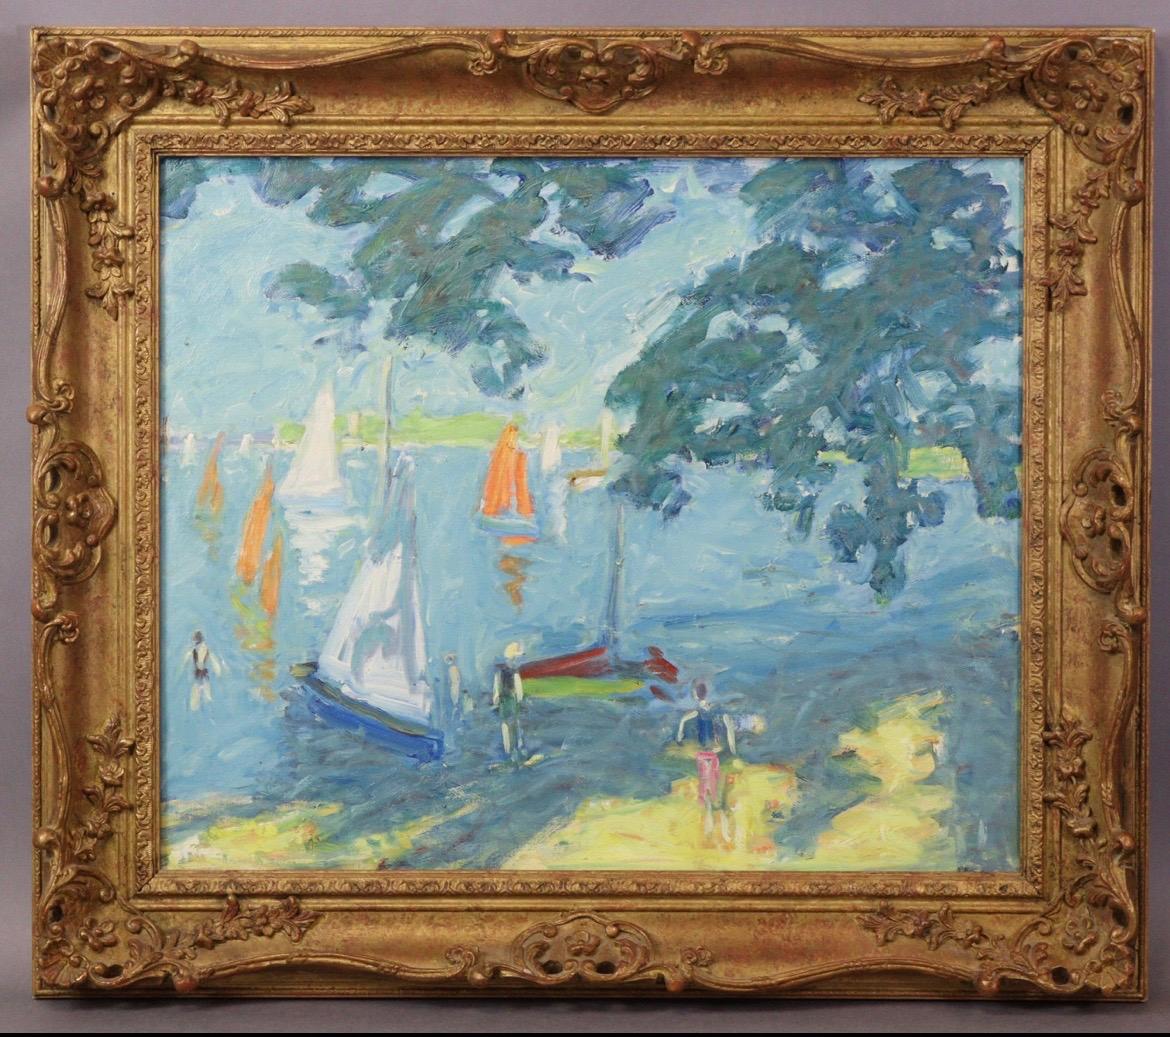 French Fauvist 20th Century Oil on Canvas, Figures Bathing in River & with Boats